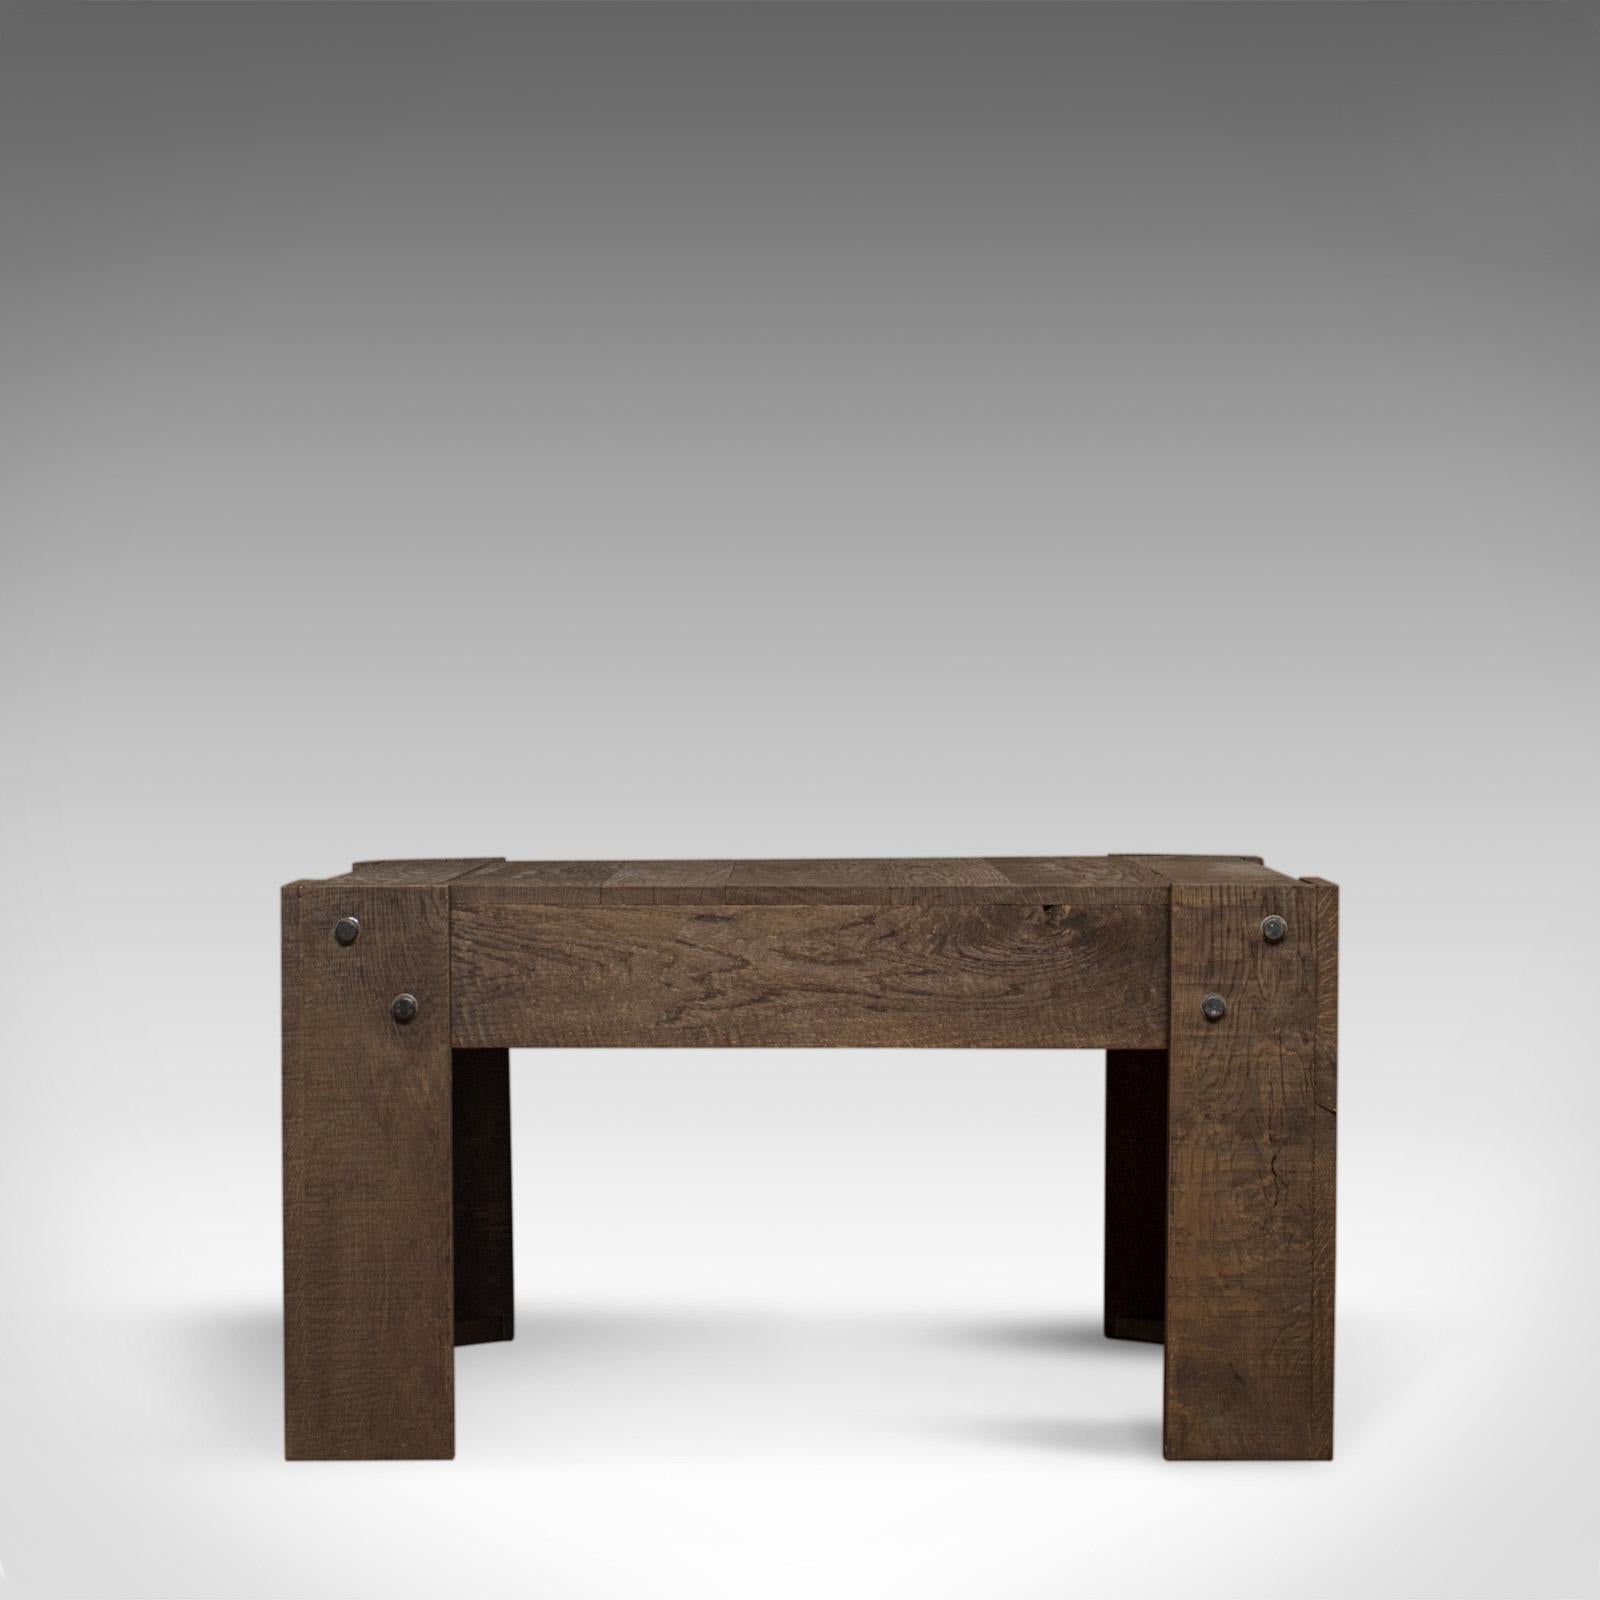 This is a vintage coffee table. A rustic, English, oak occasional or side table in industrial taste, dating to the 20th century.

Select cuts of oak display rich hues and fine grain interest
Good consistent colour and a desirable aged